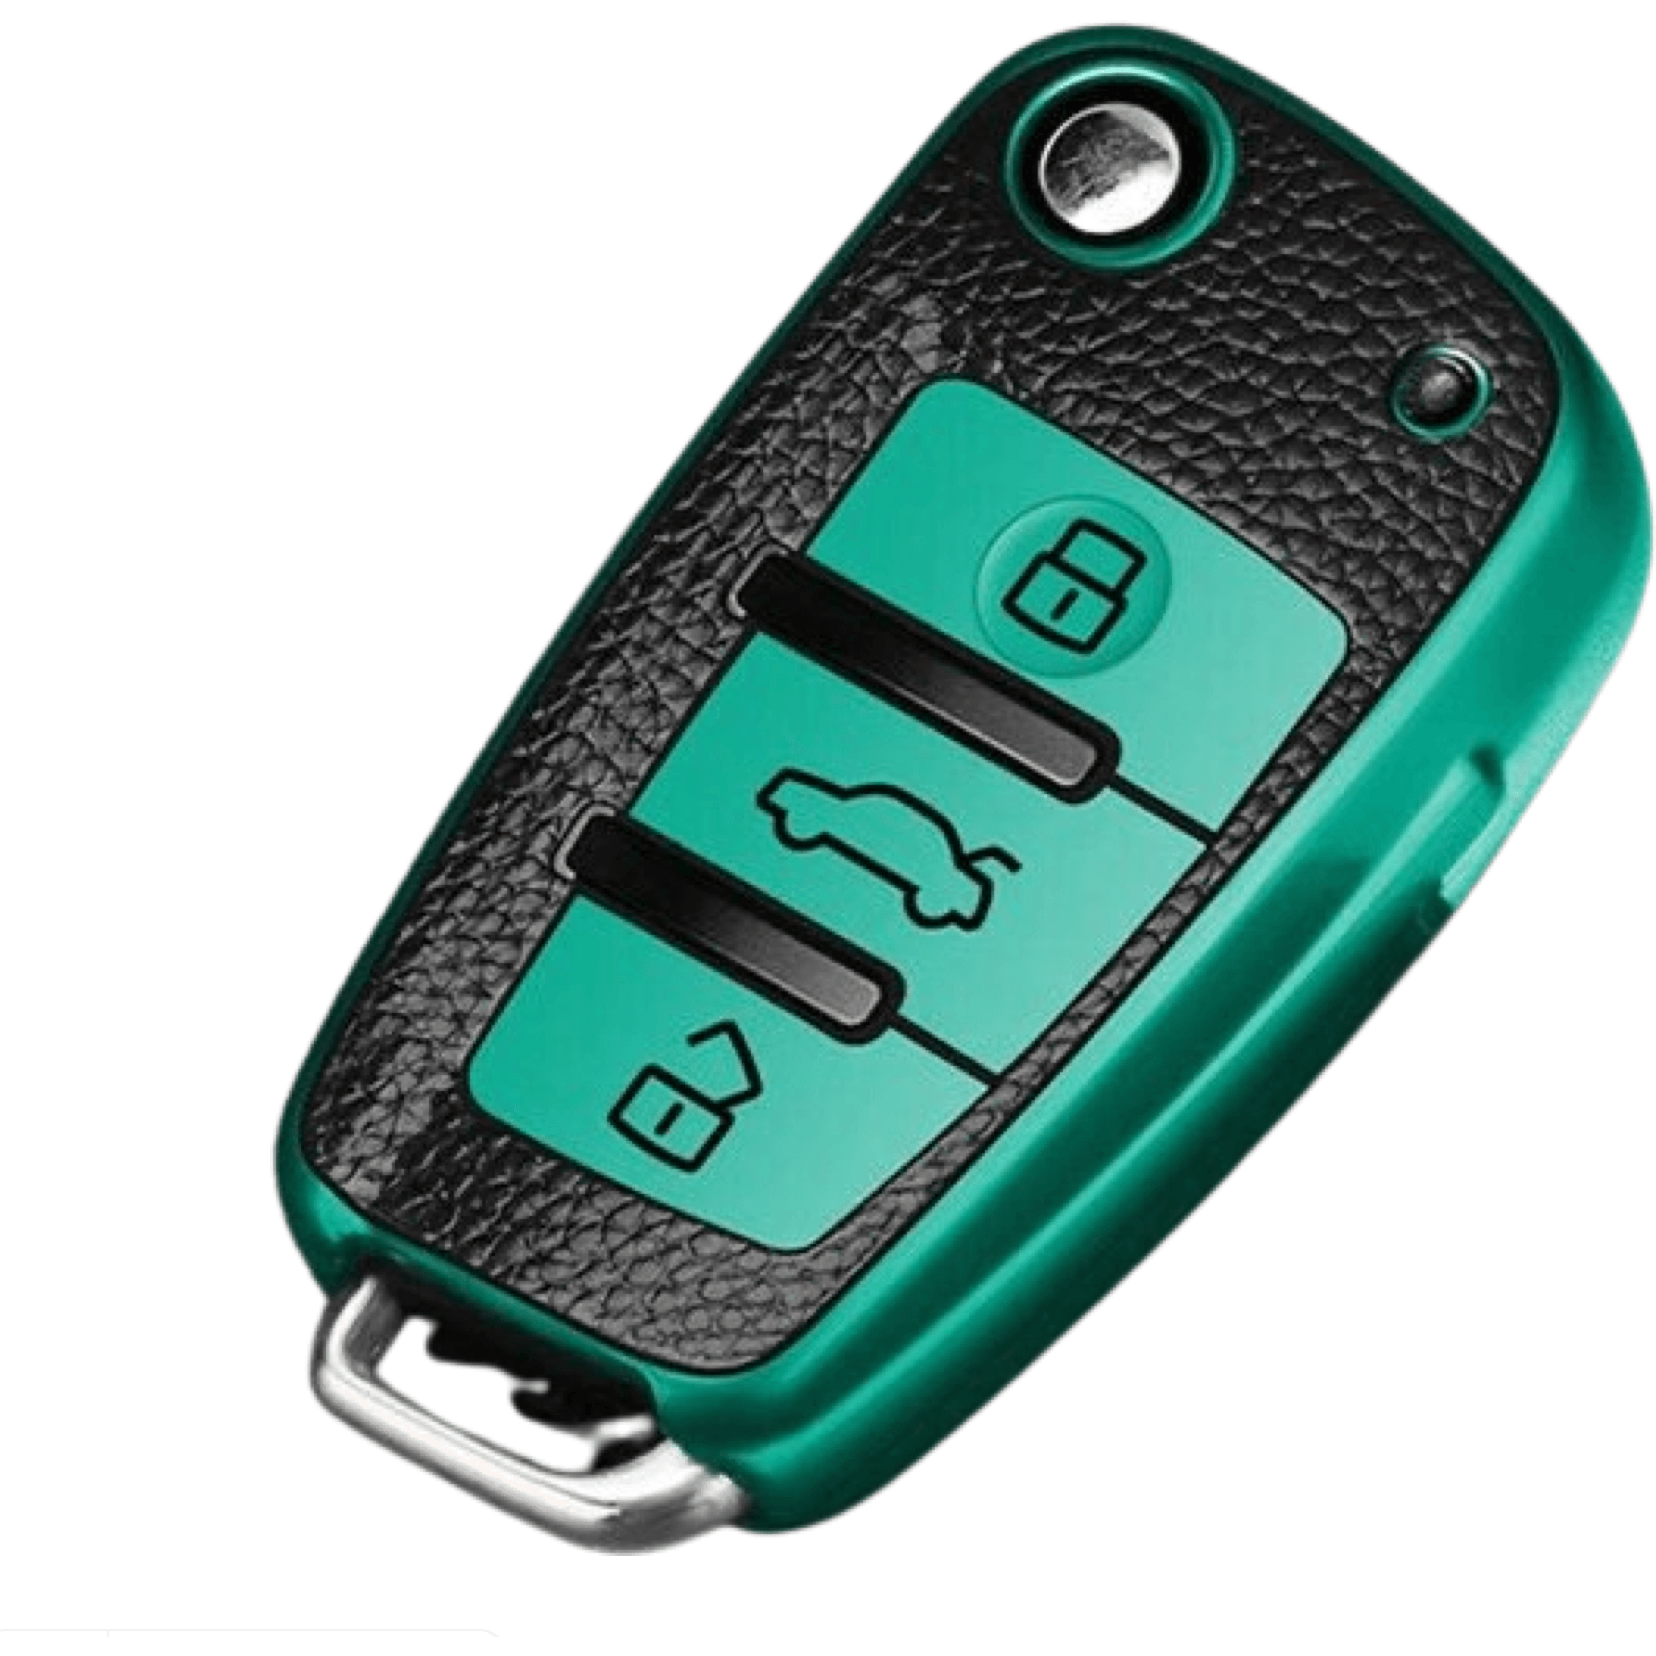 Audi key fob cover - Green leather | Keysleeves